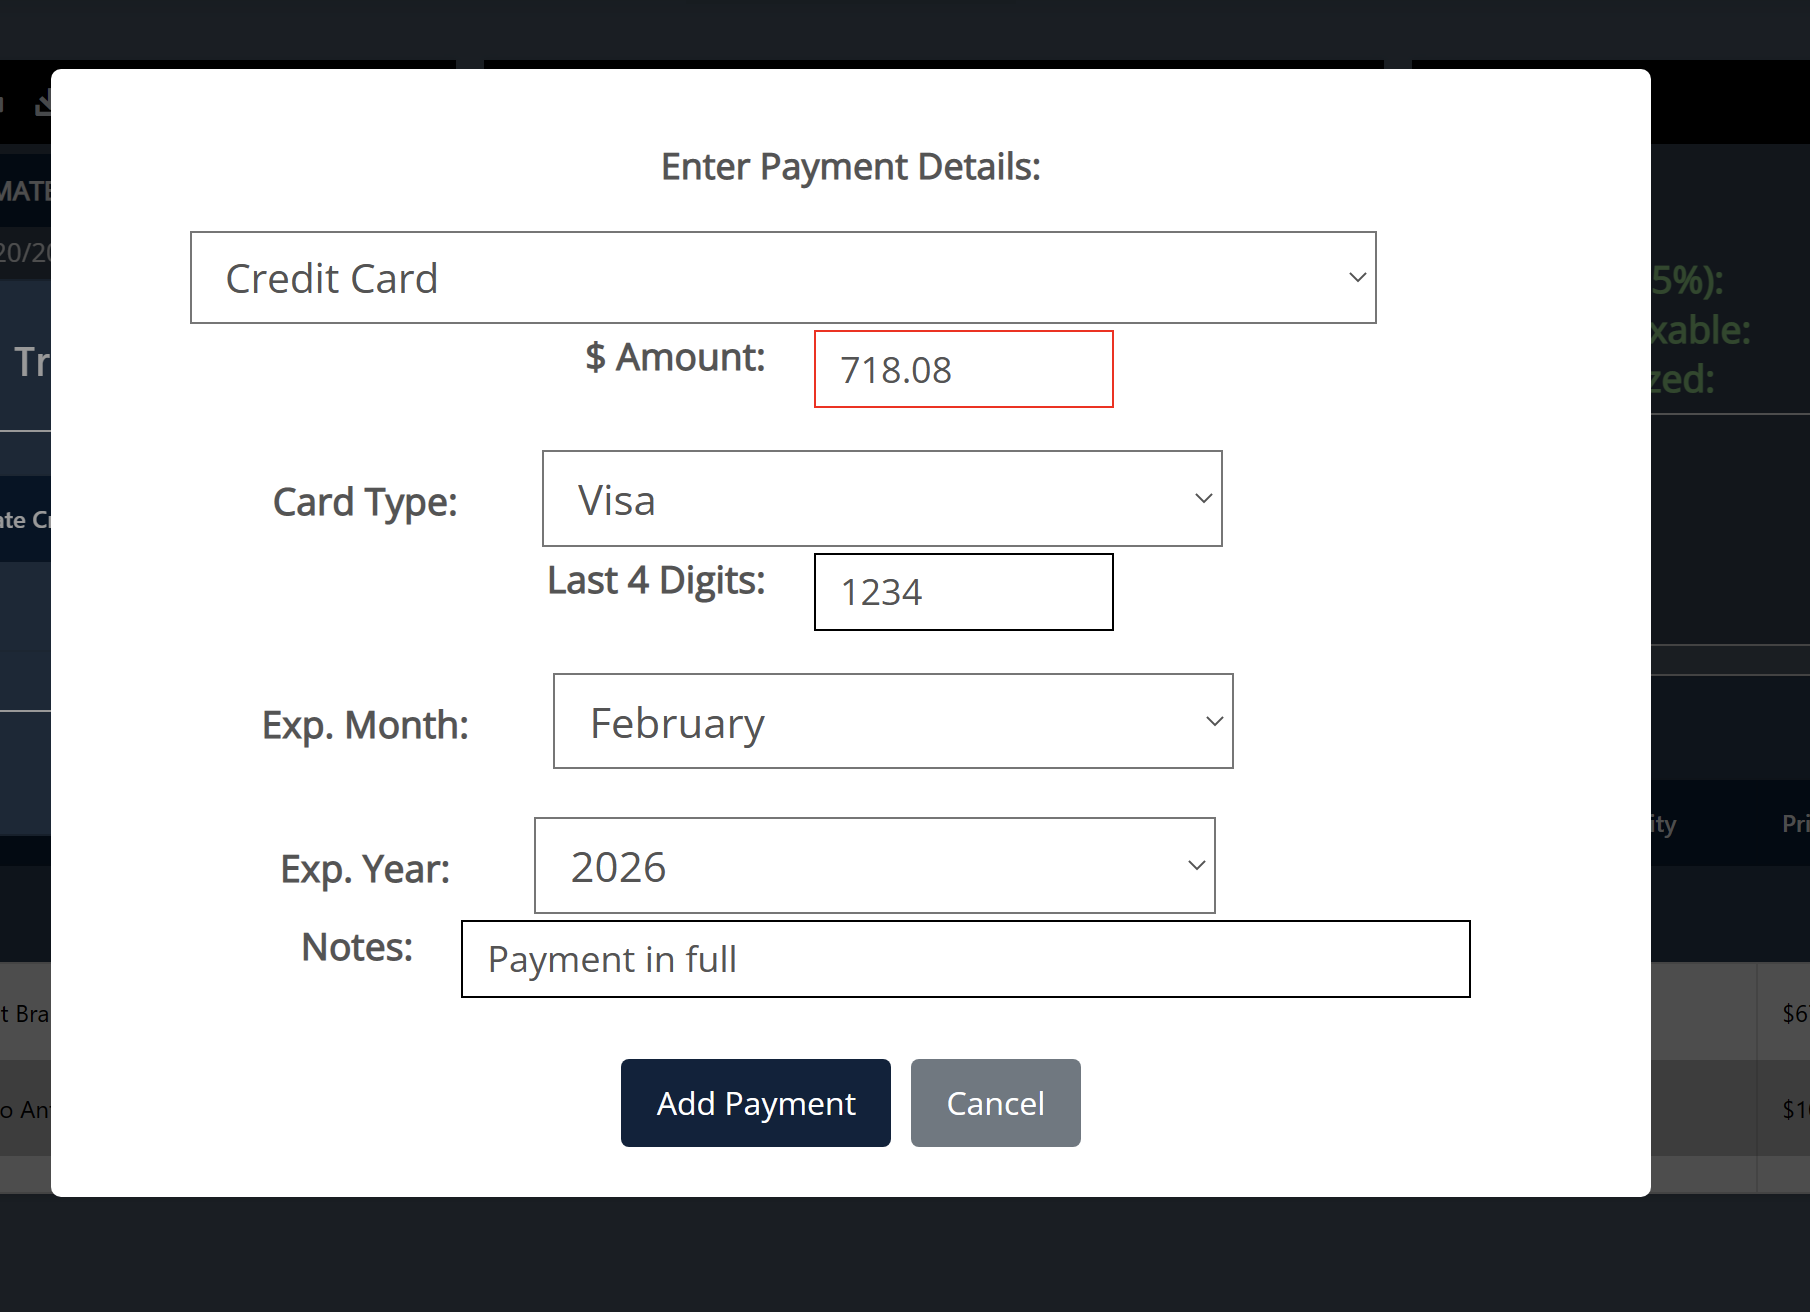 TurboGarage's auto repair payment software has the option to allow users to enter manual payments as well - for credit card, cash, checks, and other types